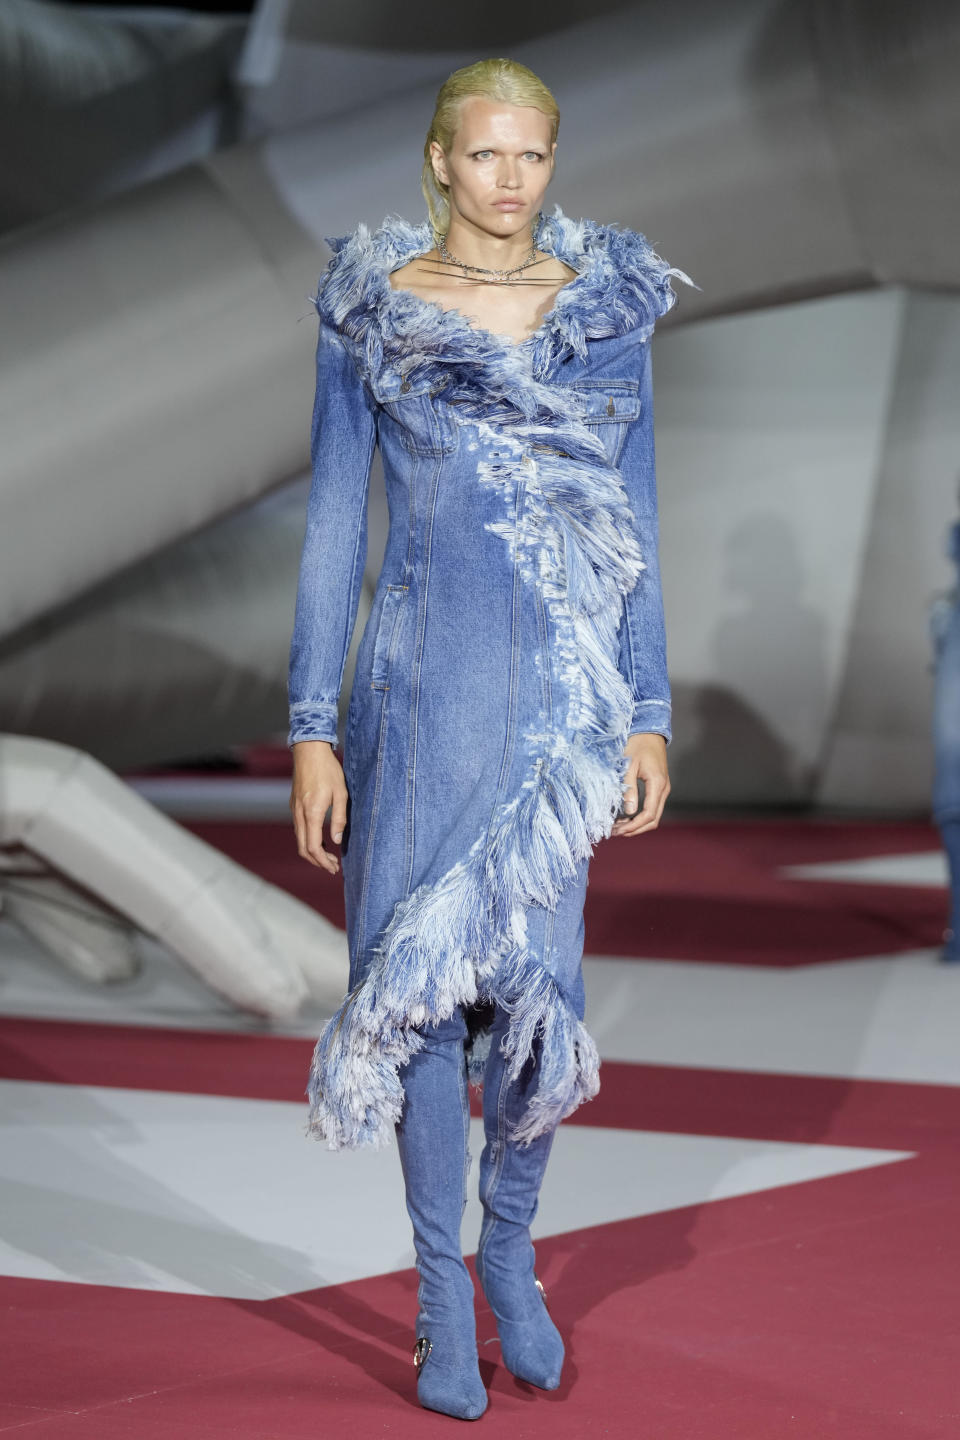 A model wears a creation as part of the Diesel women's Spring Summer 2023 collection presented in Milan, Italy, Wednesday, Sept. 21, 2022. (AP Photo/Antonio Calanni)